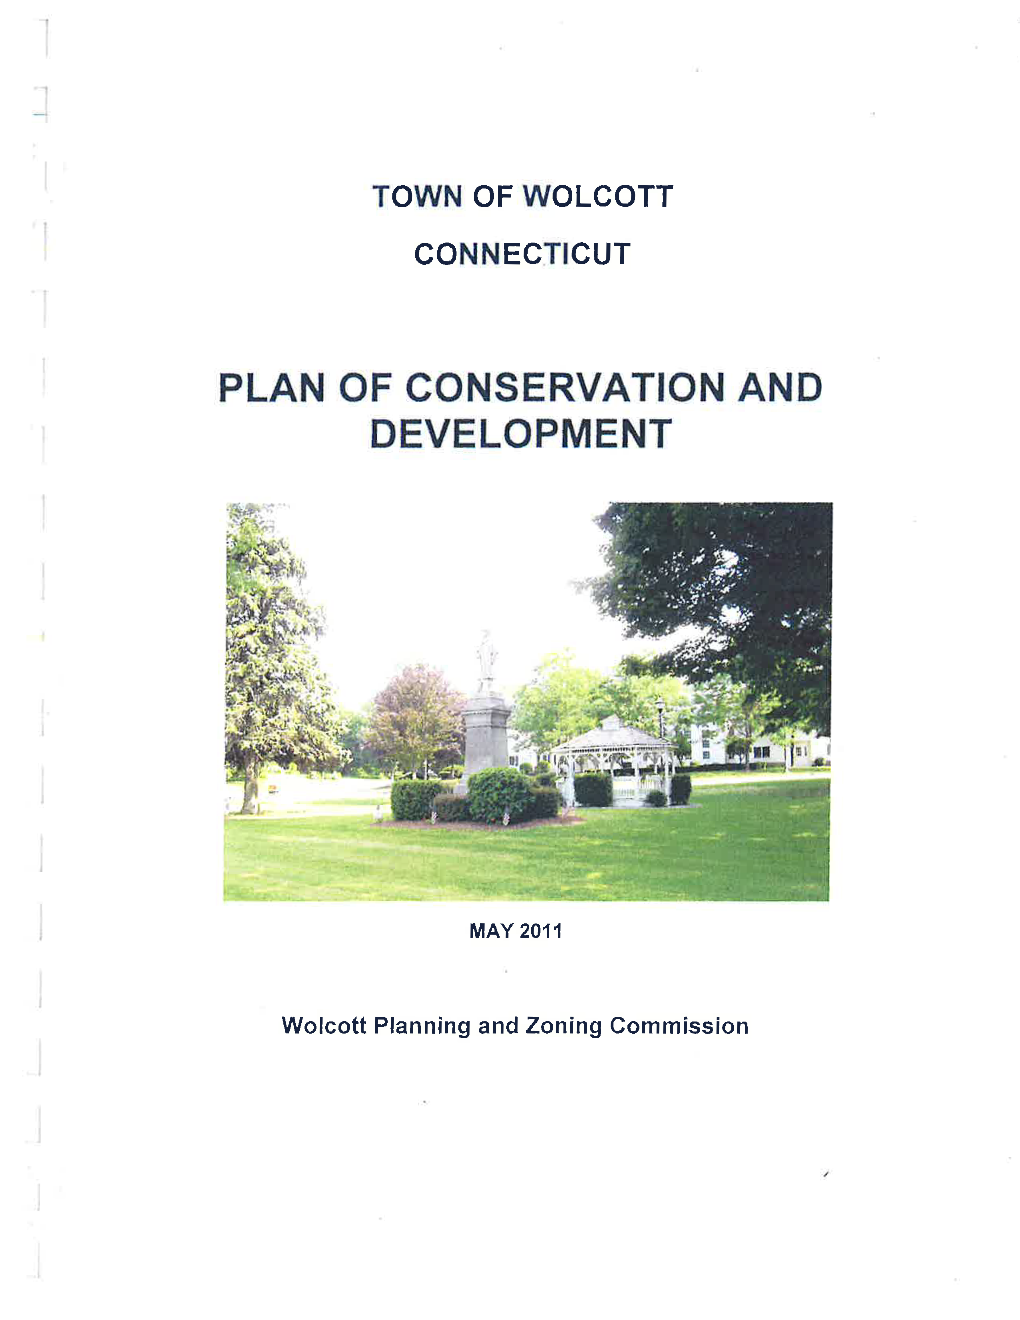 Town of Wolcott Plan of Conservation and Development